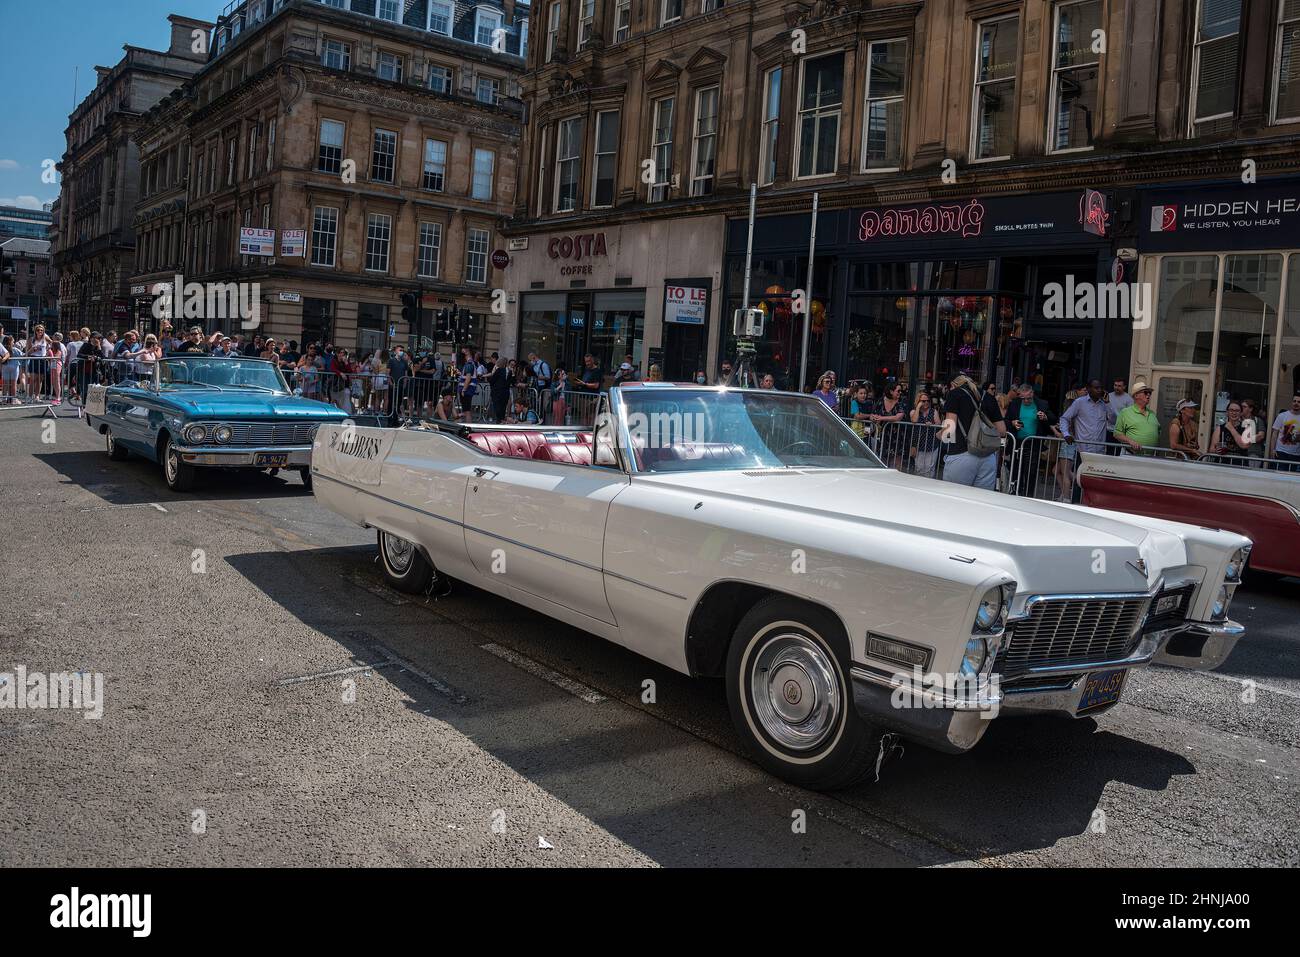 New York City homcoming parade for first men on moon filming in Glasgow for Indiana Jone 5. Stock Photo